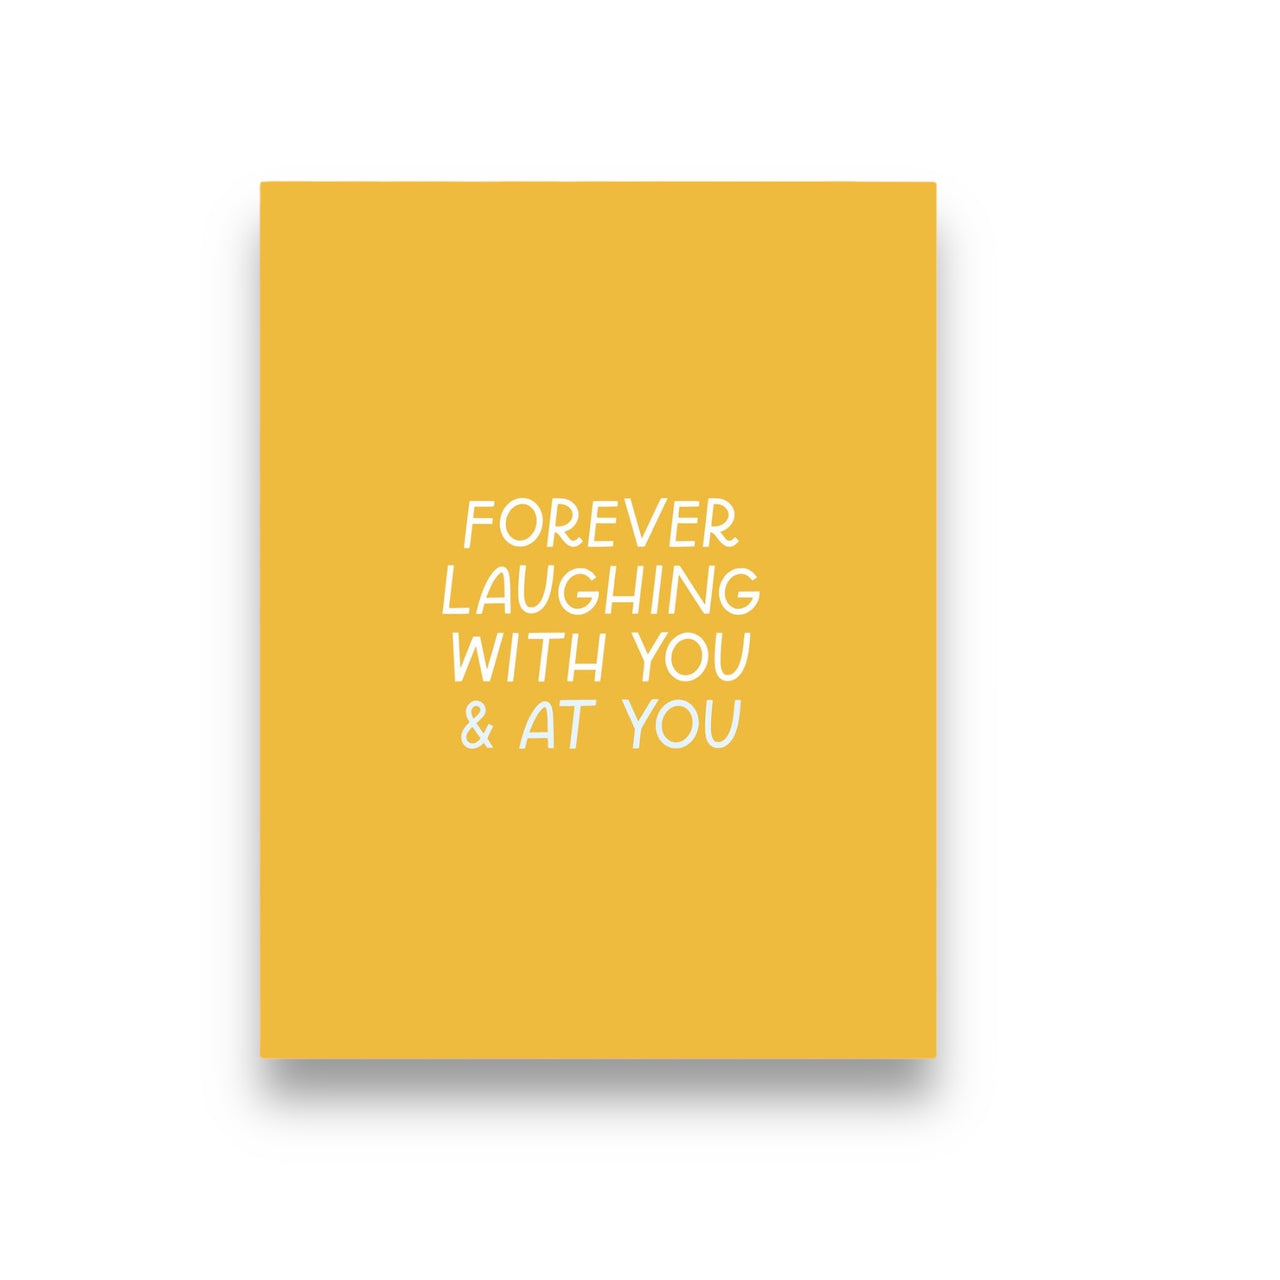 Laughing At & With You Card